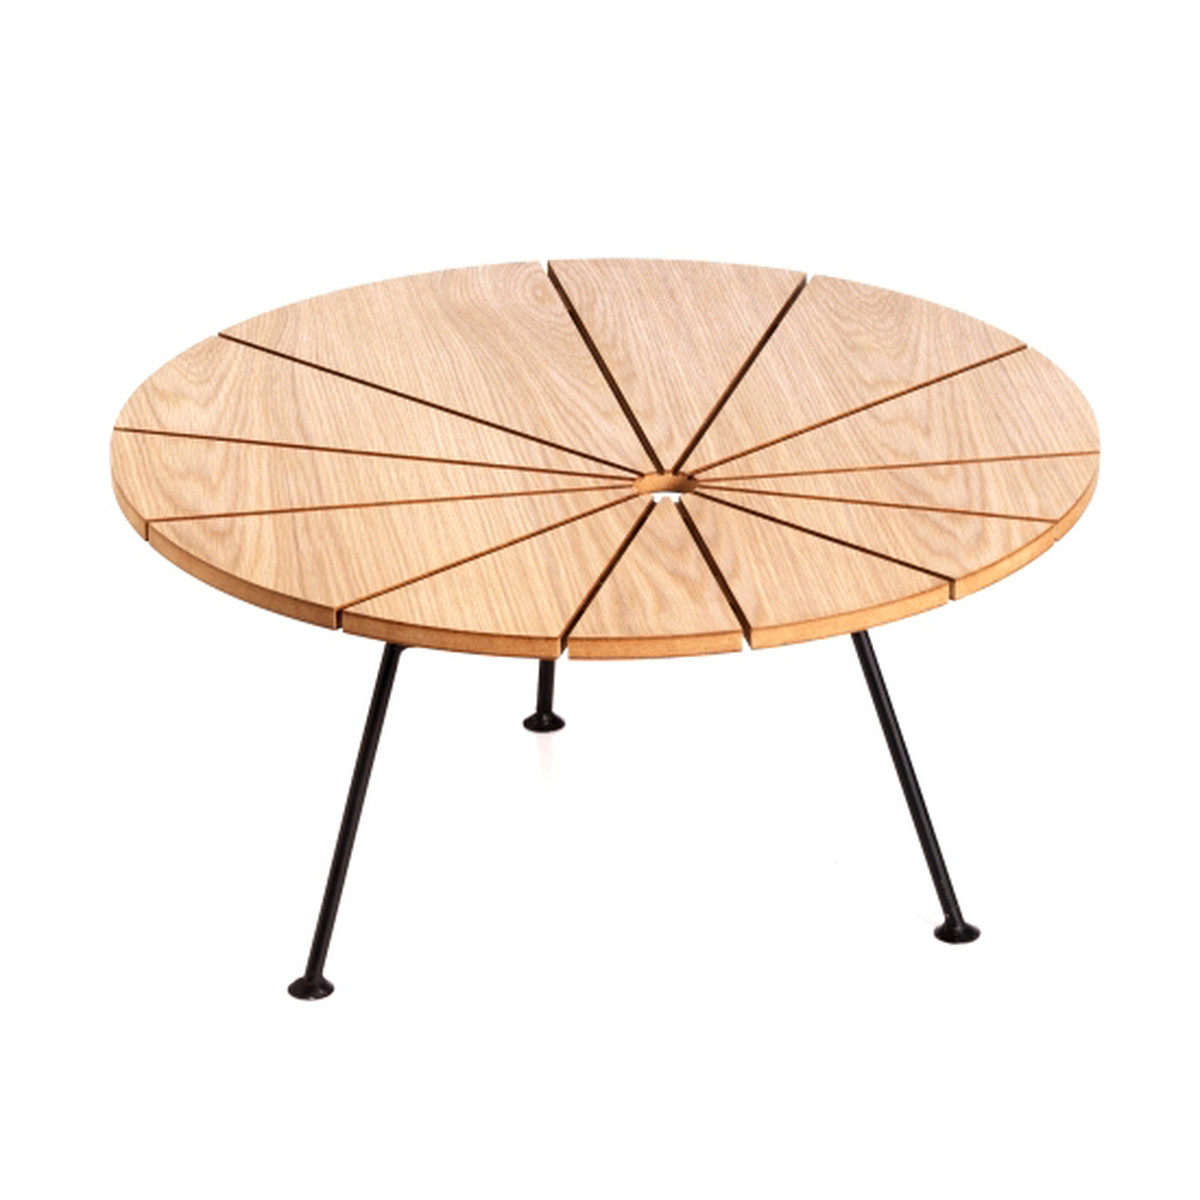 Bam Bam Big n Low side table